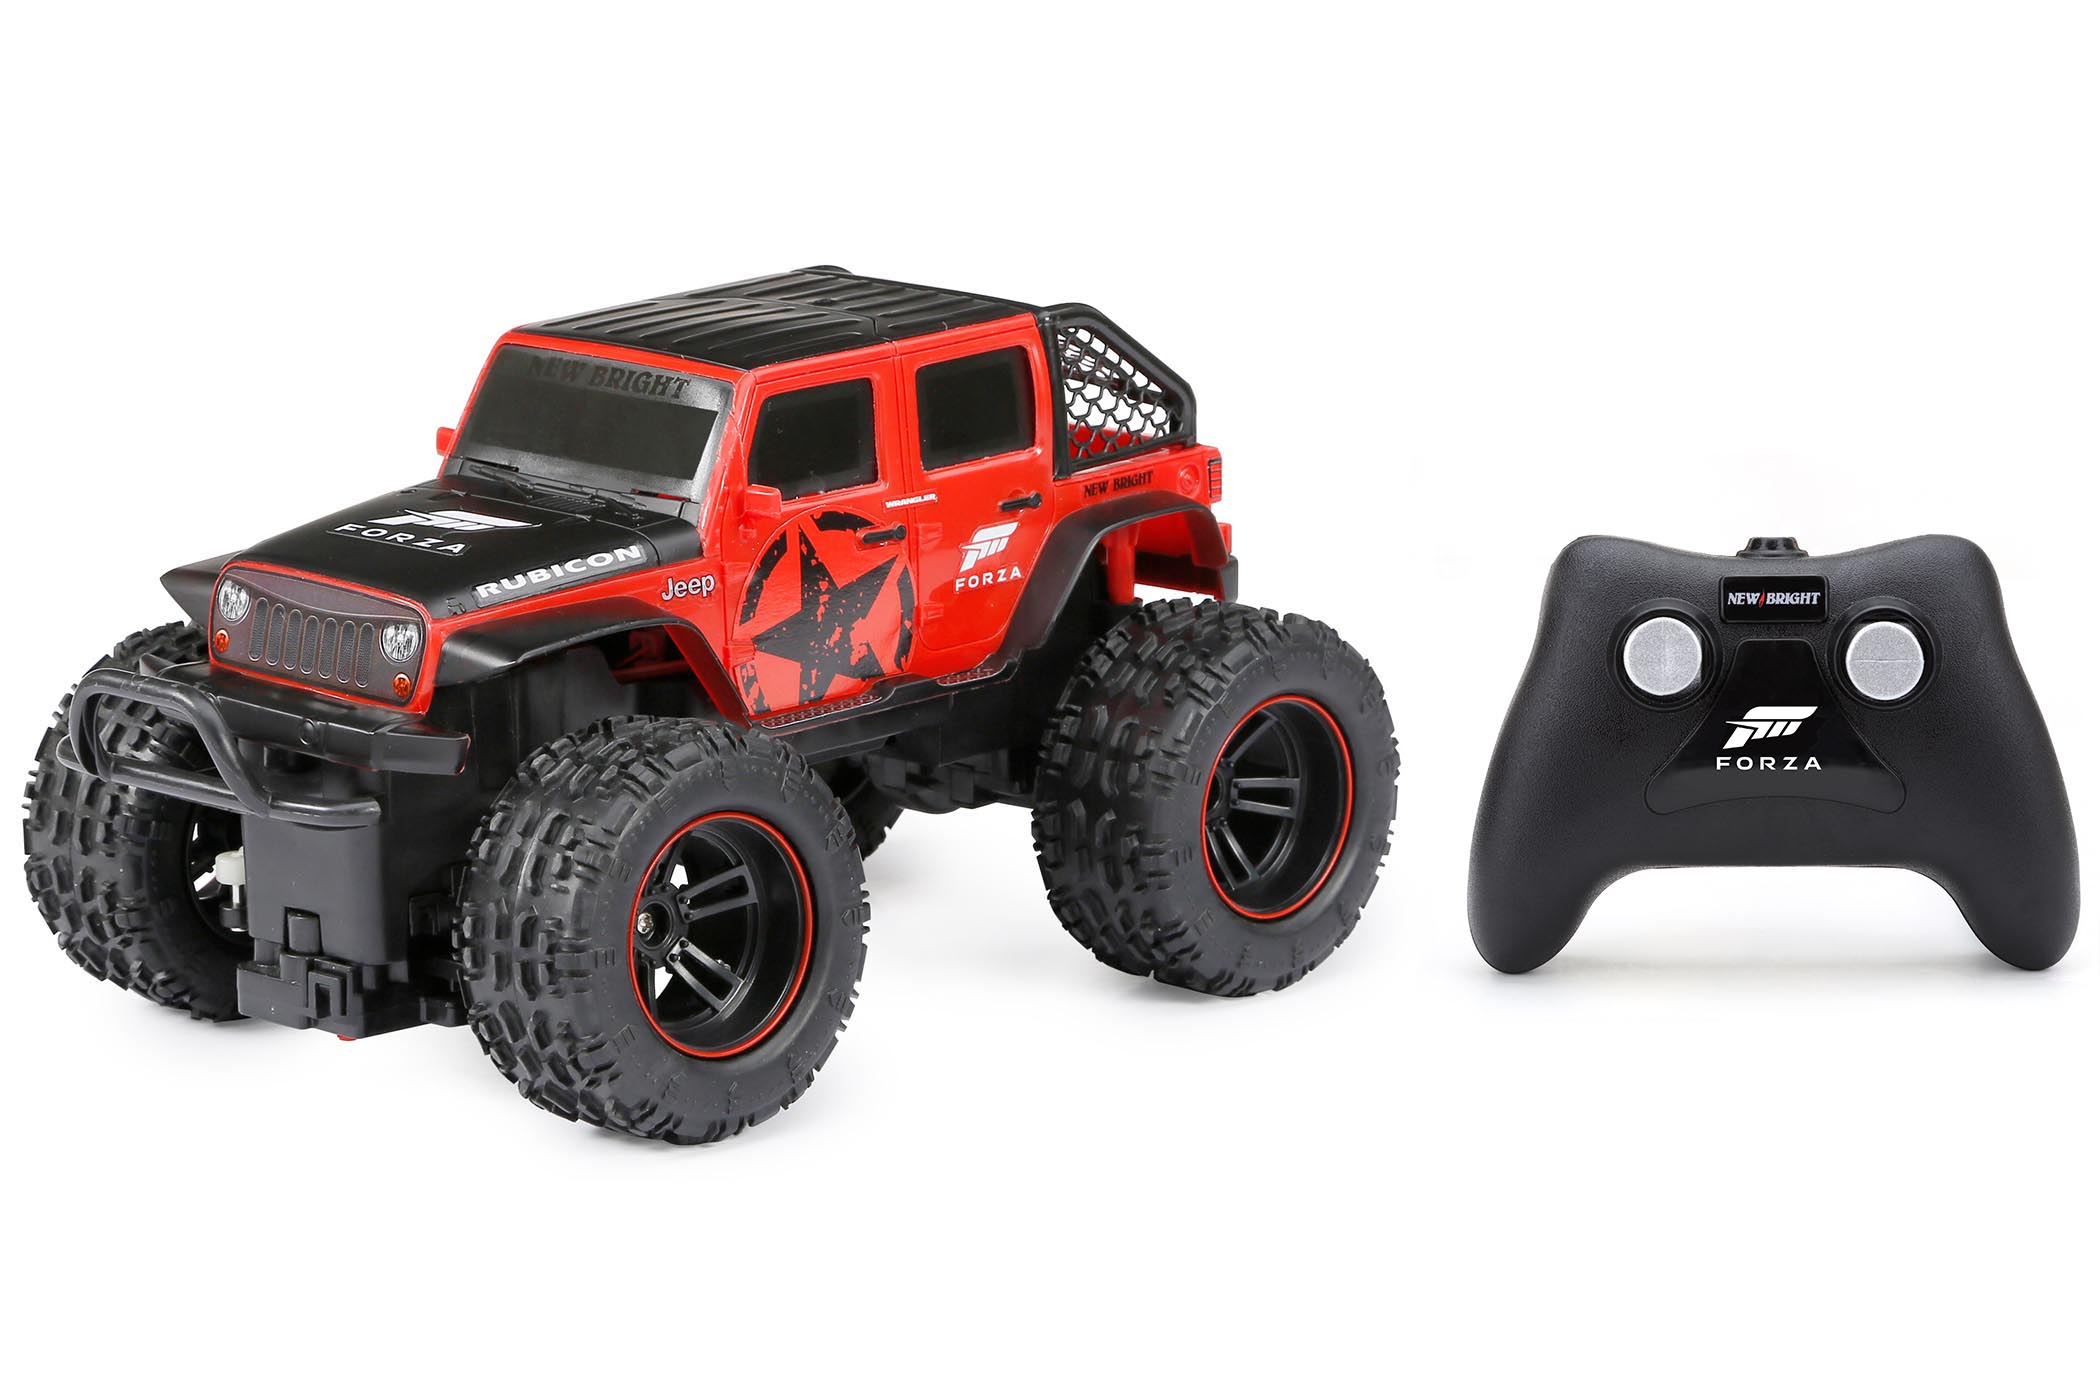 New Bright (1:16) Forza Jeep Wrangler Battery Radio Control Red/Black Truck, 1688UF-4RK - image 1 of 10